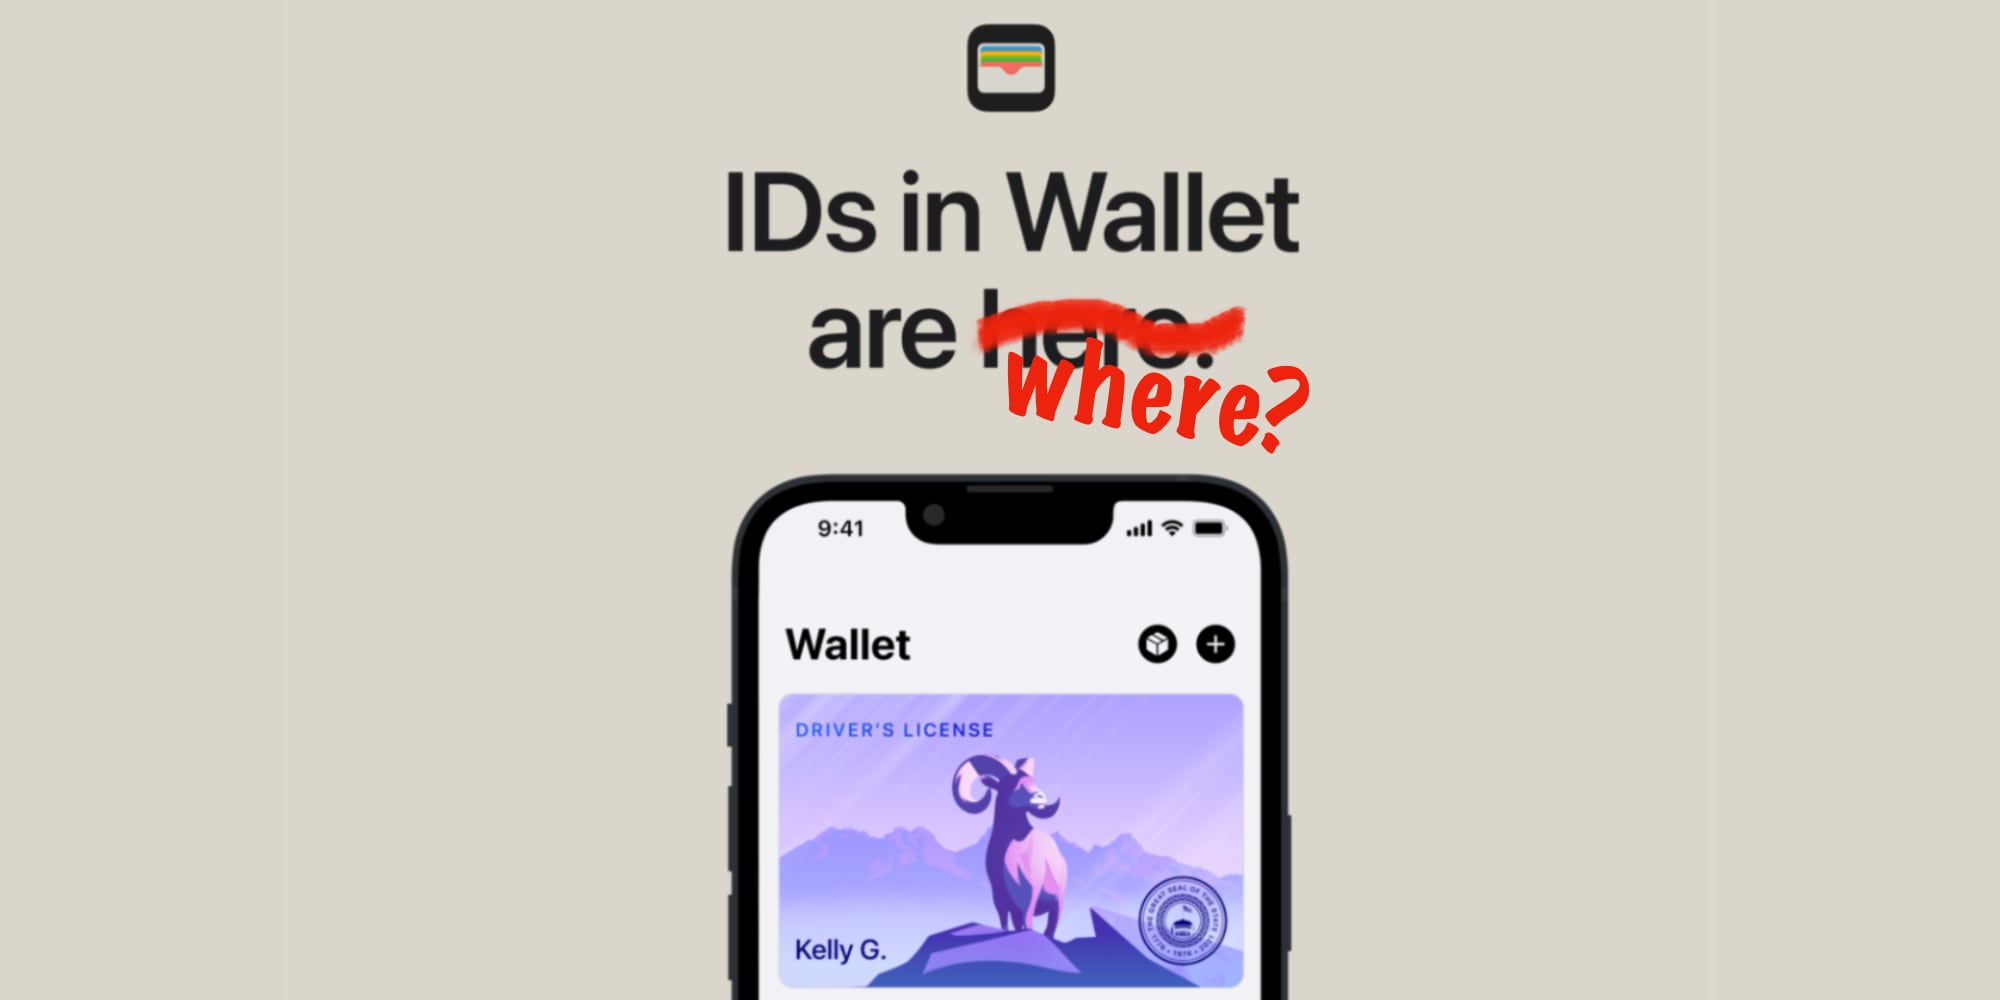 Digital Wallet, Identity Verification, and More